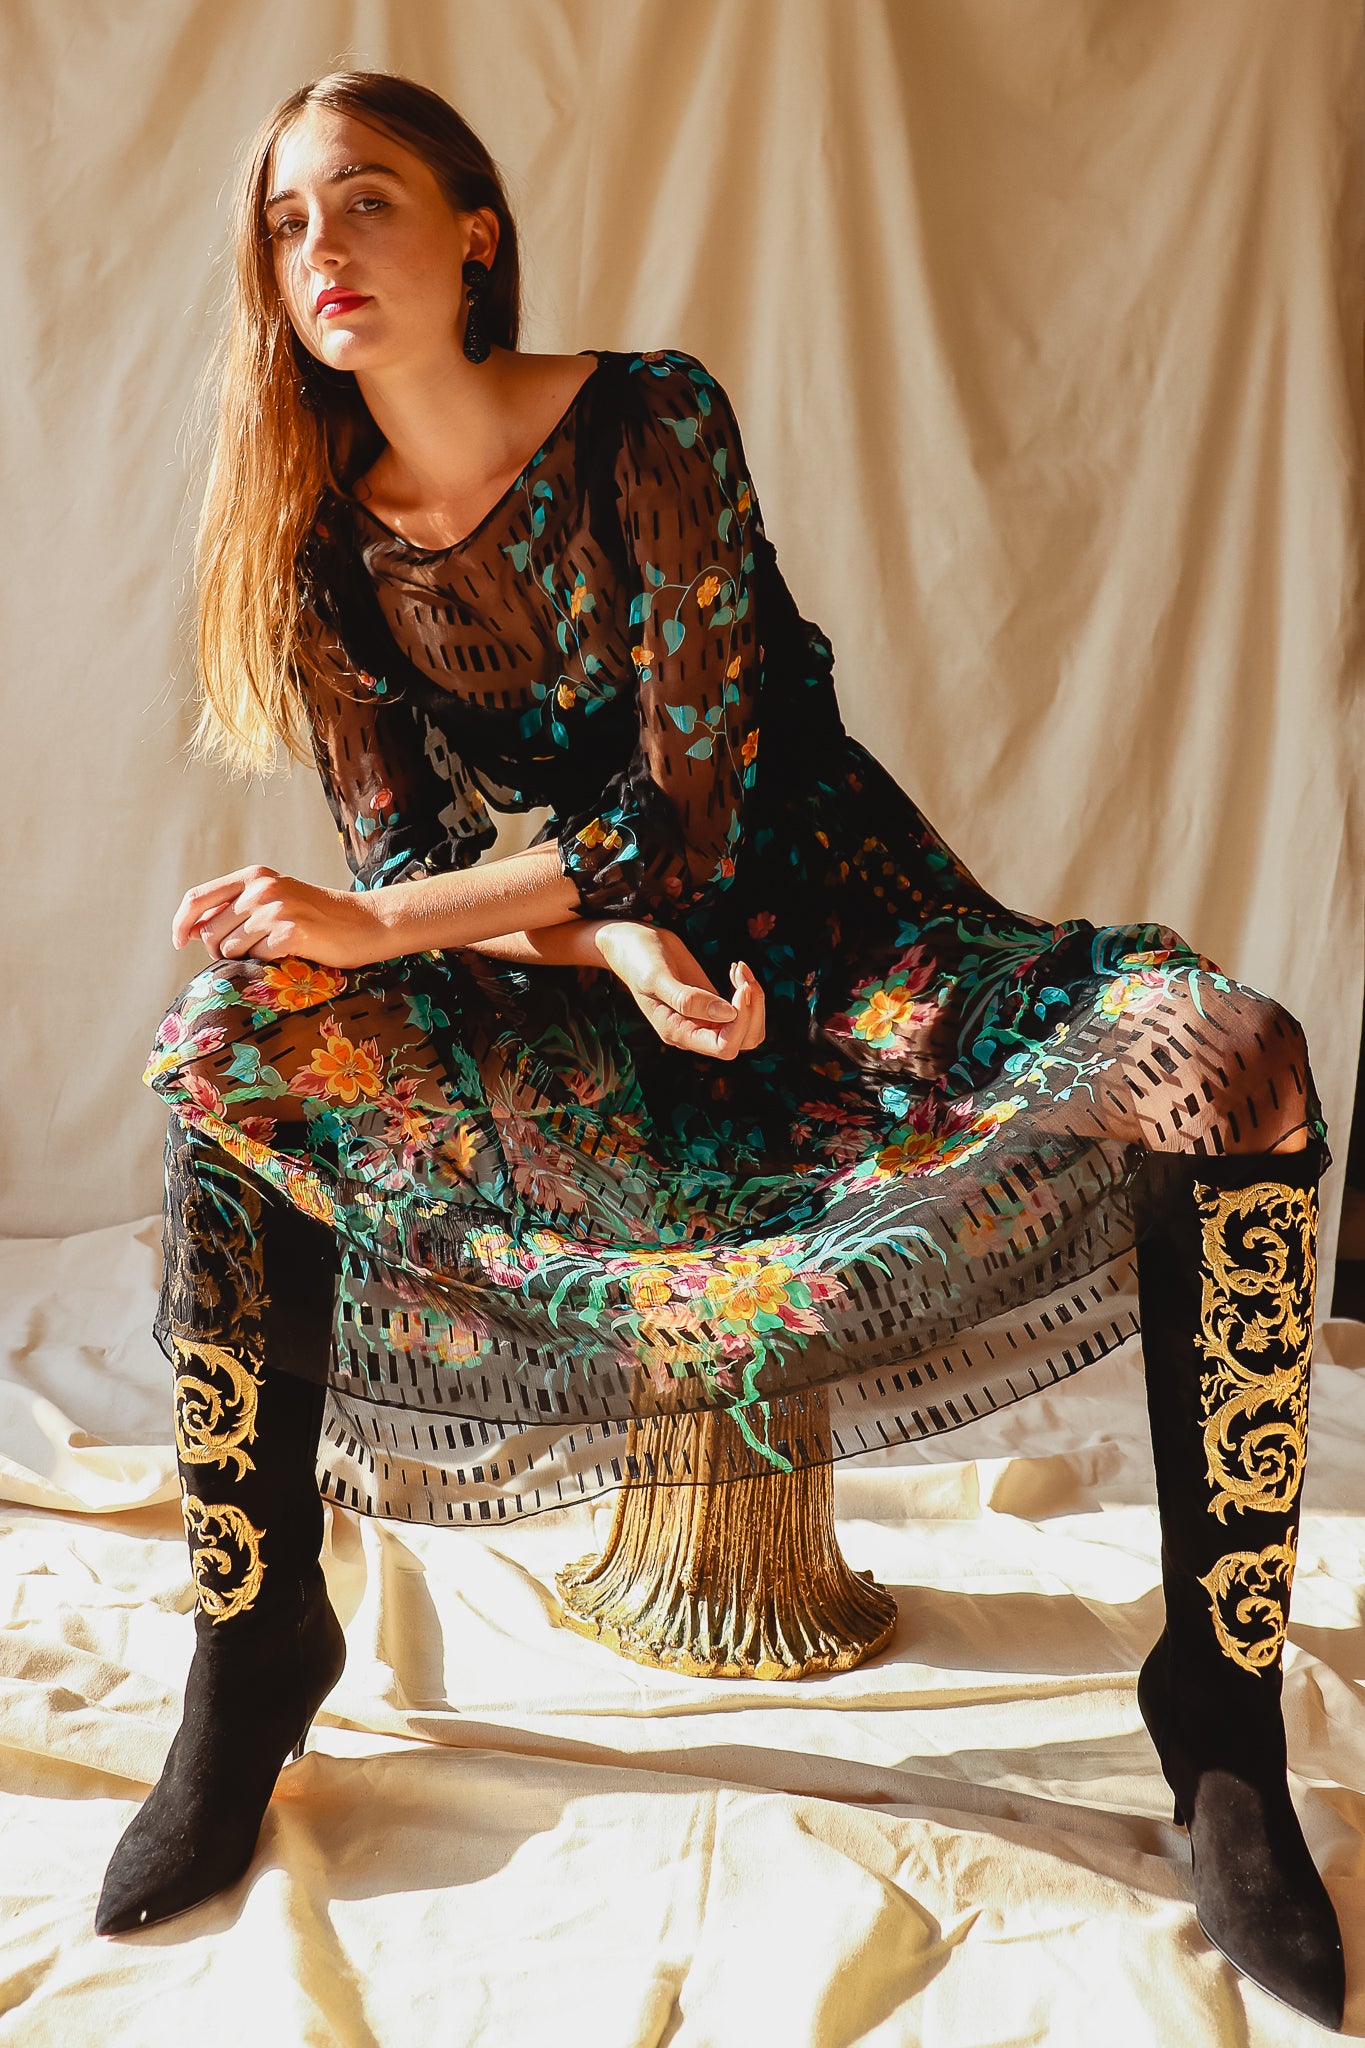 Recess Vintage Consignment LA Girl in Vintage Sheer Silk Floral Dress & Embroidered Boots on Stool